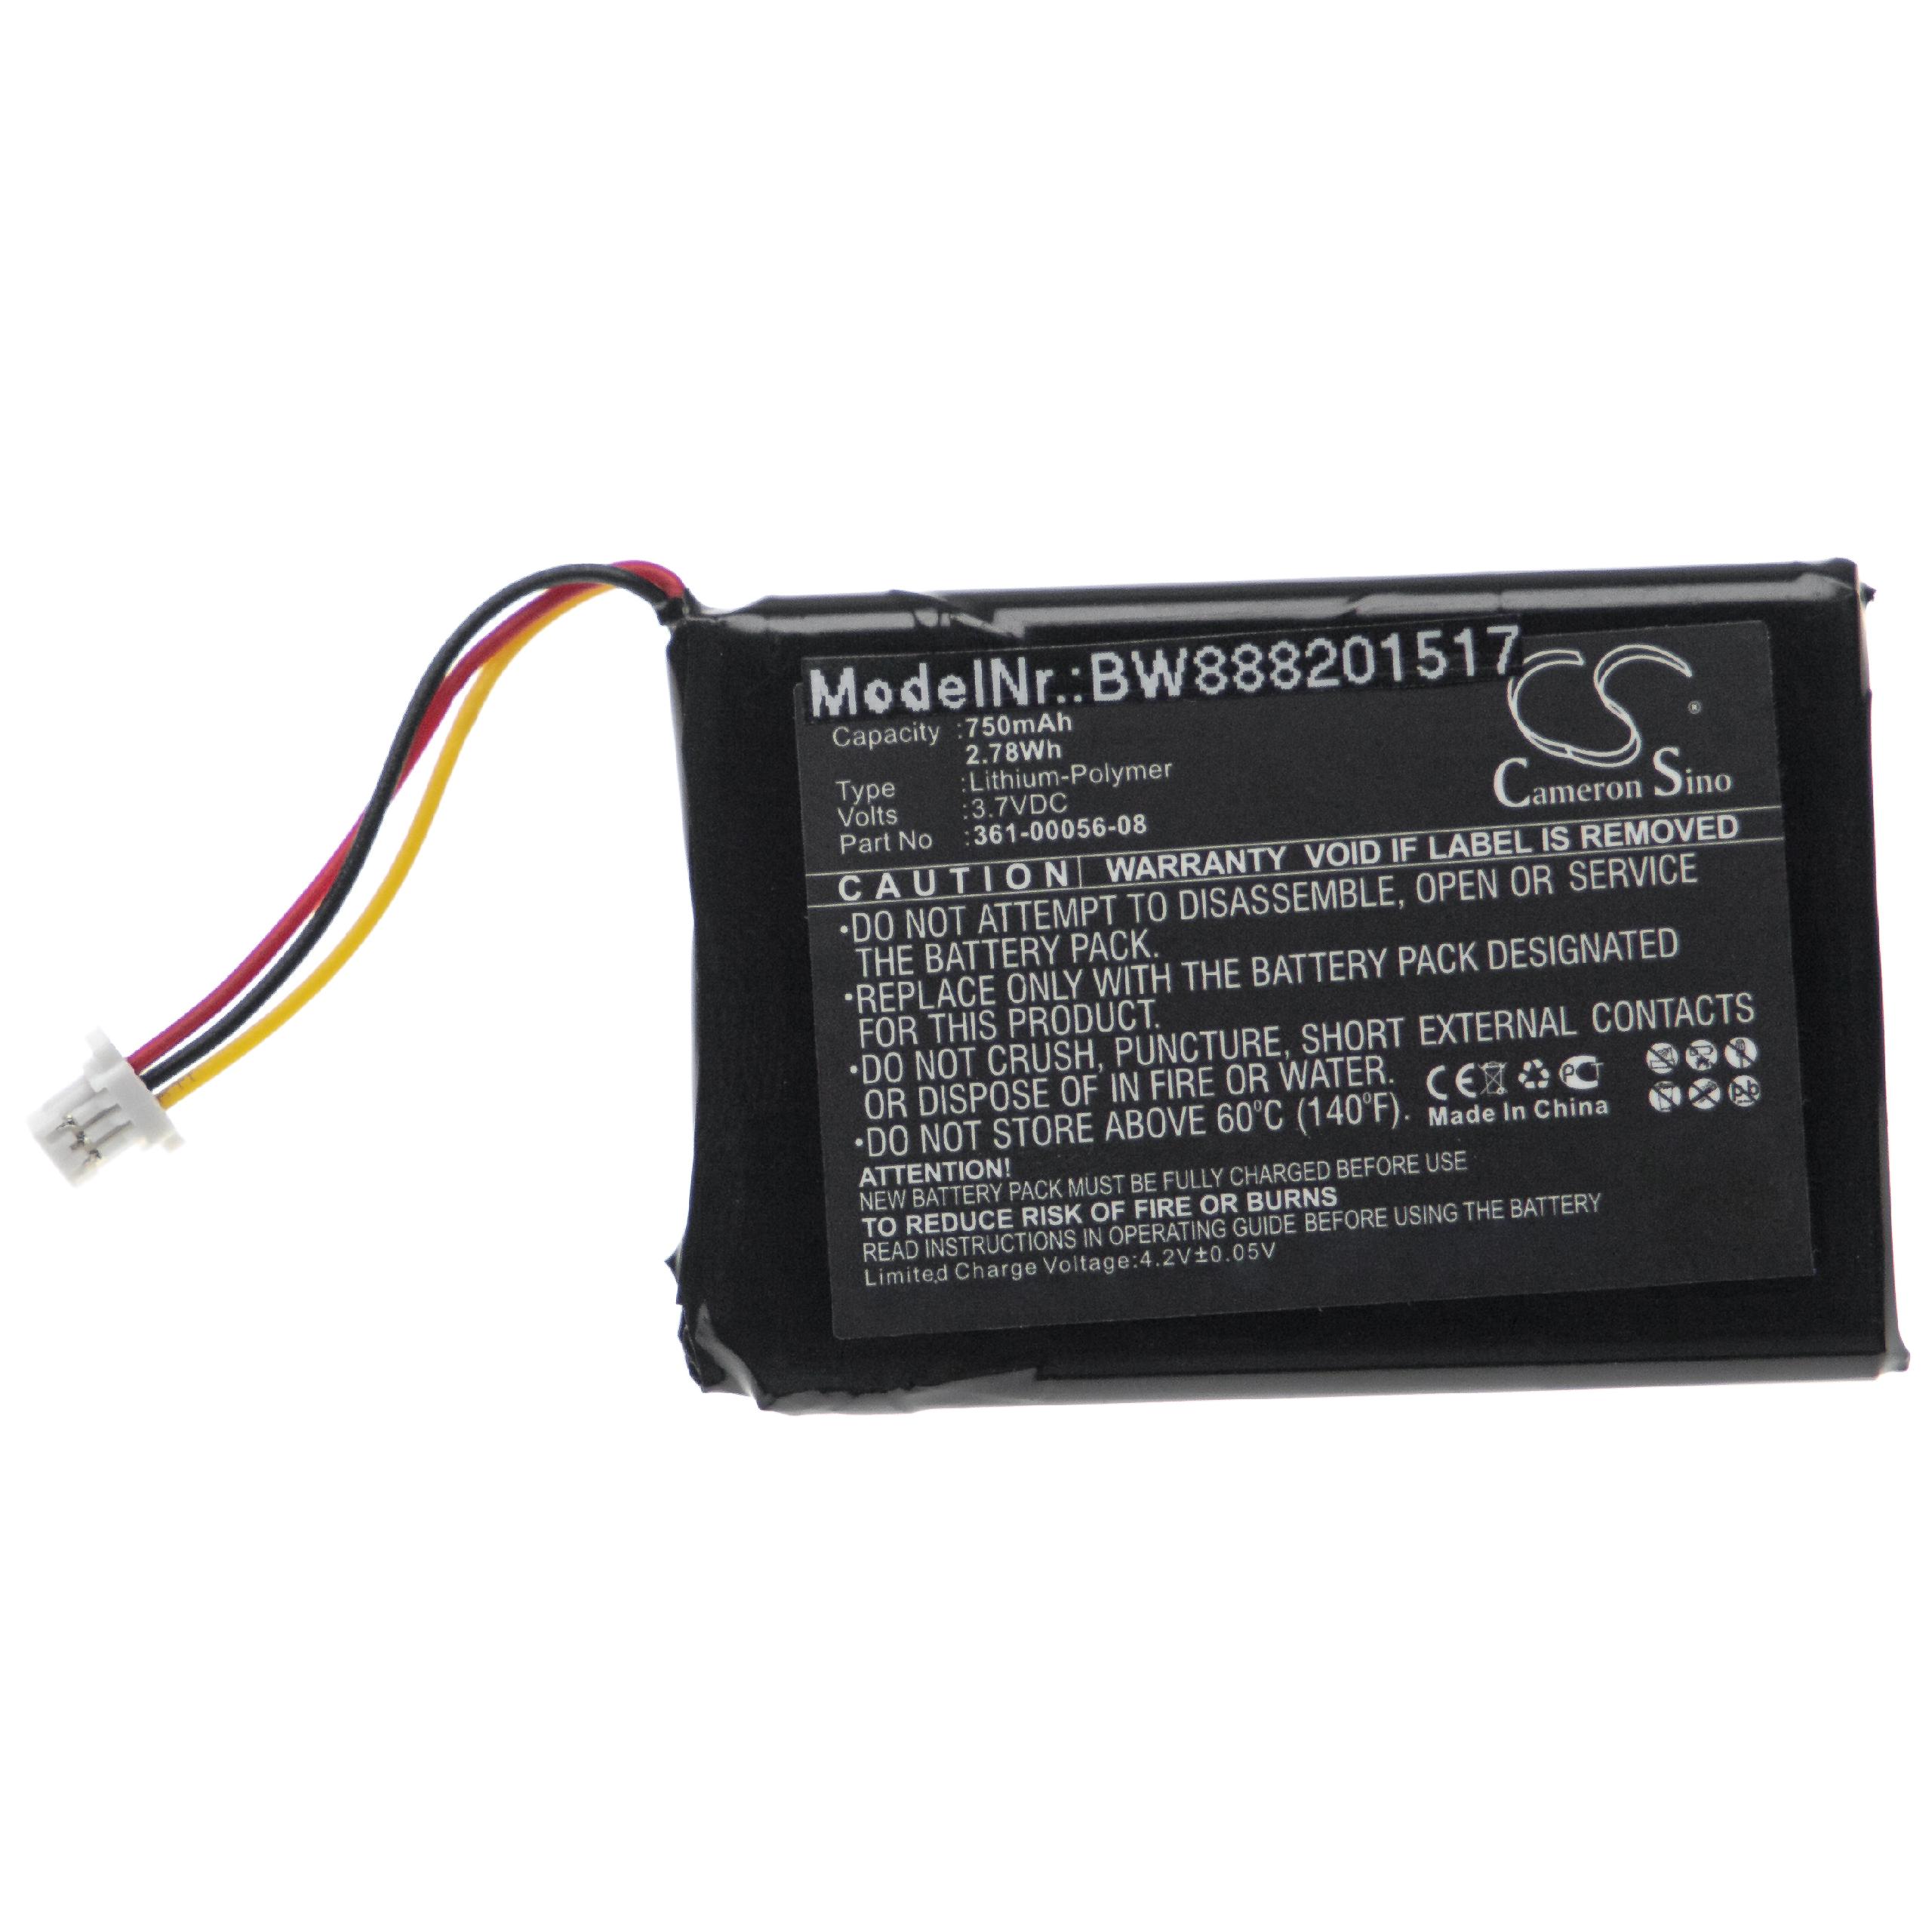 GPS Battery Replacement for Garmin 361-00056-00, 361-00045-00, 1ICP5/34/45, 1ICP4/34/5 - 750mAh, 4.2V